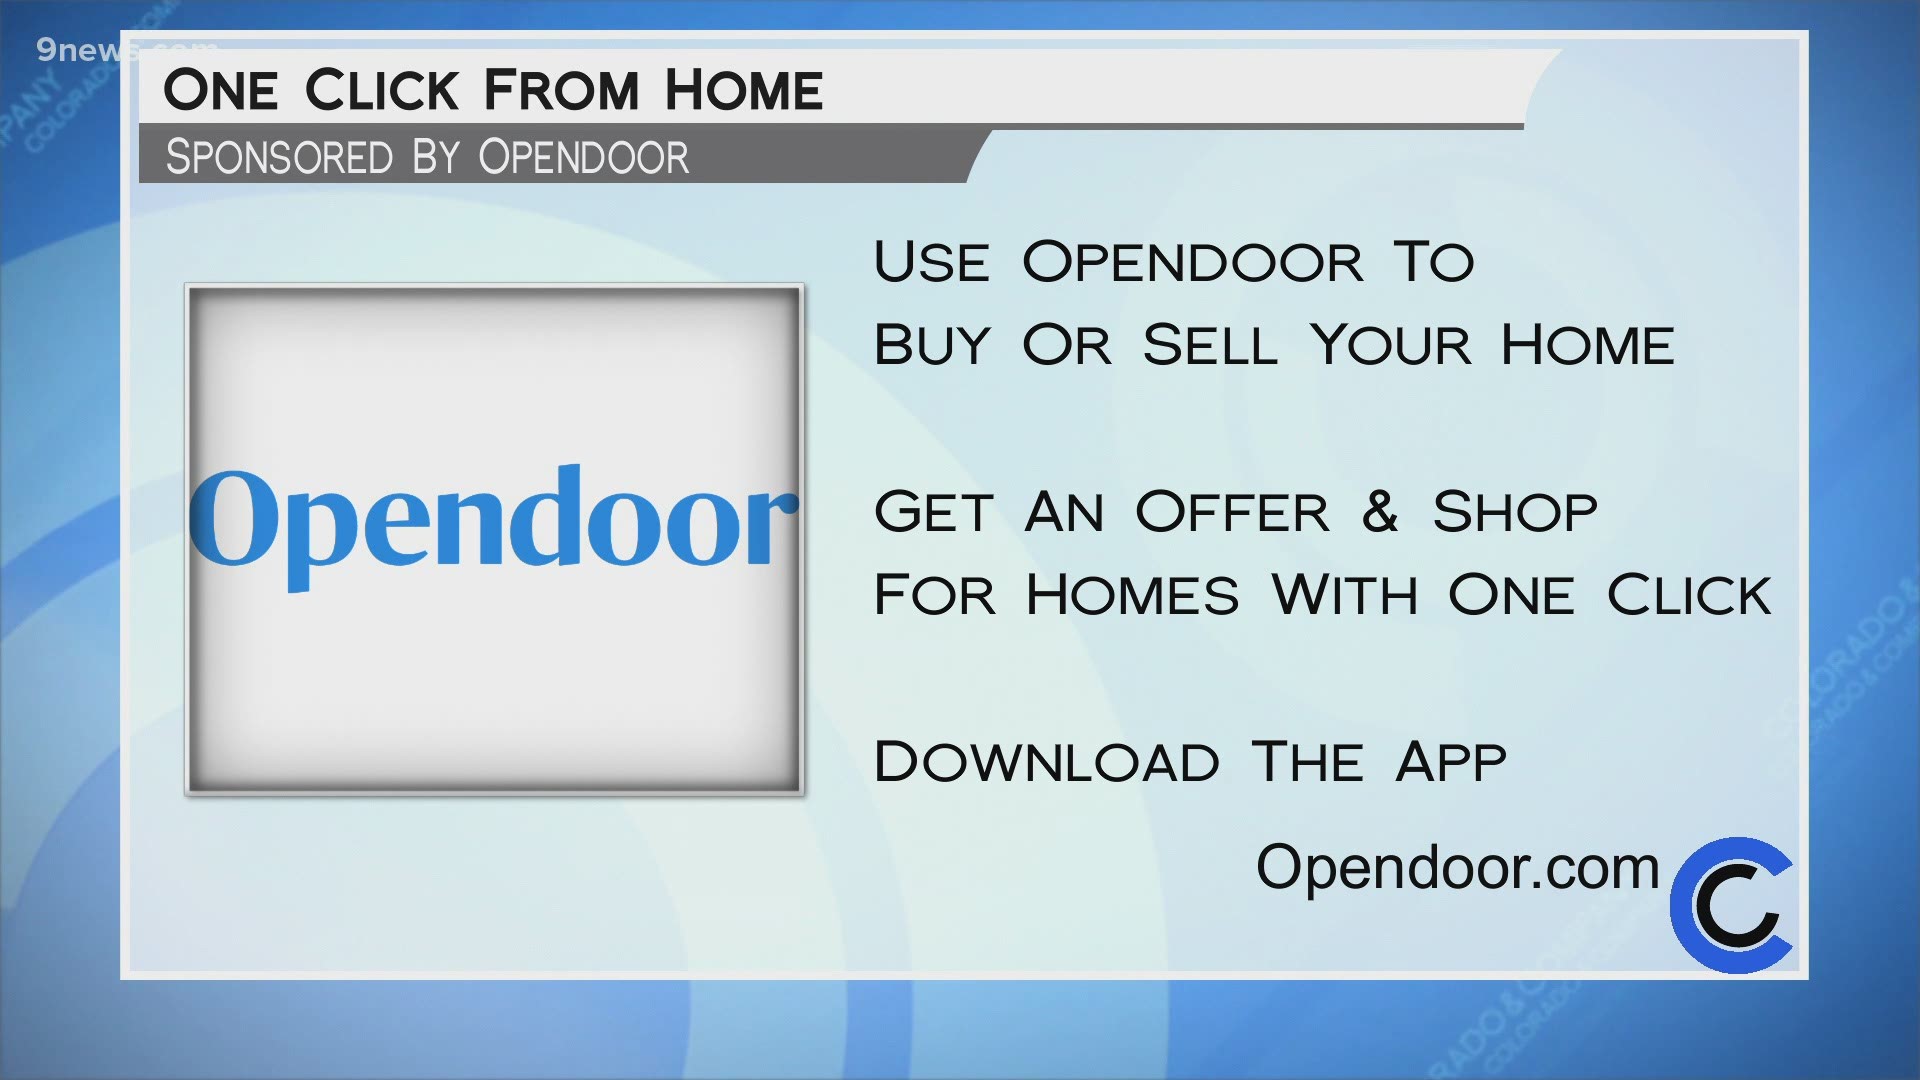 Visit Opendoor.com and request a no-cost, no-obligation offer. You can also download the app and get to house hunting.